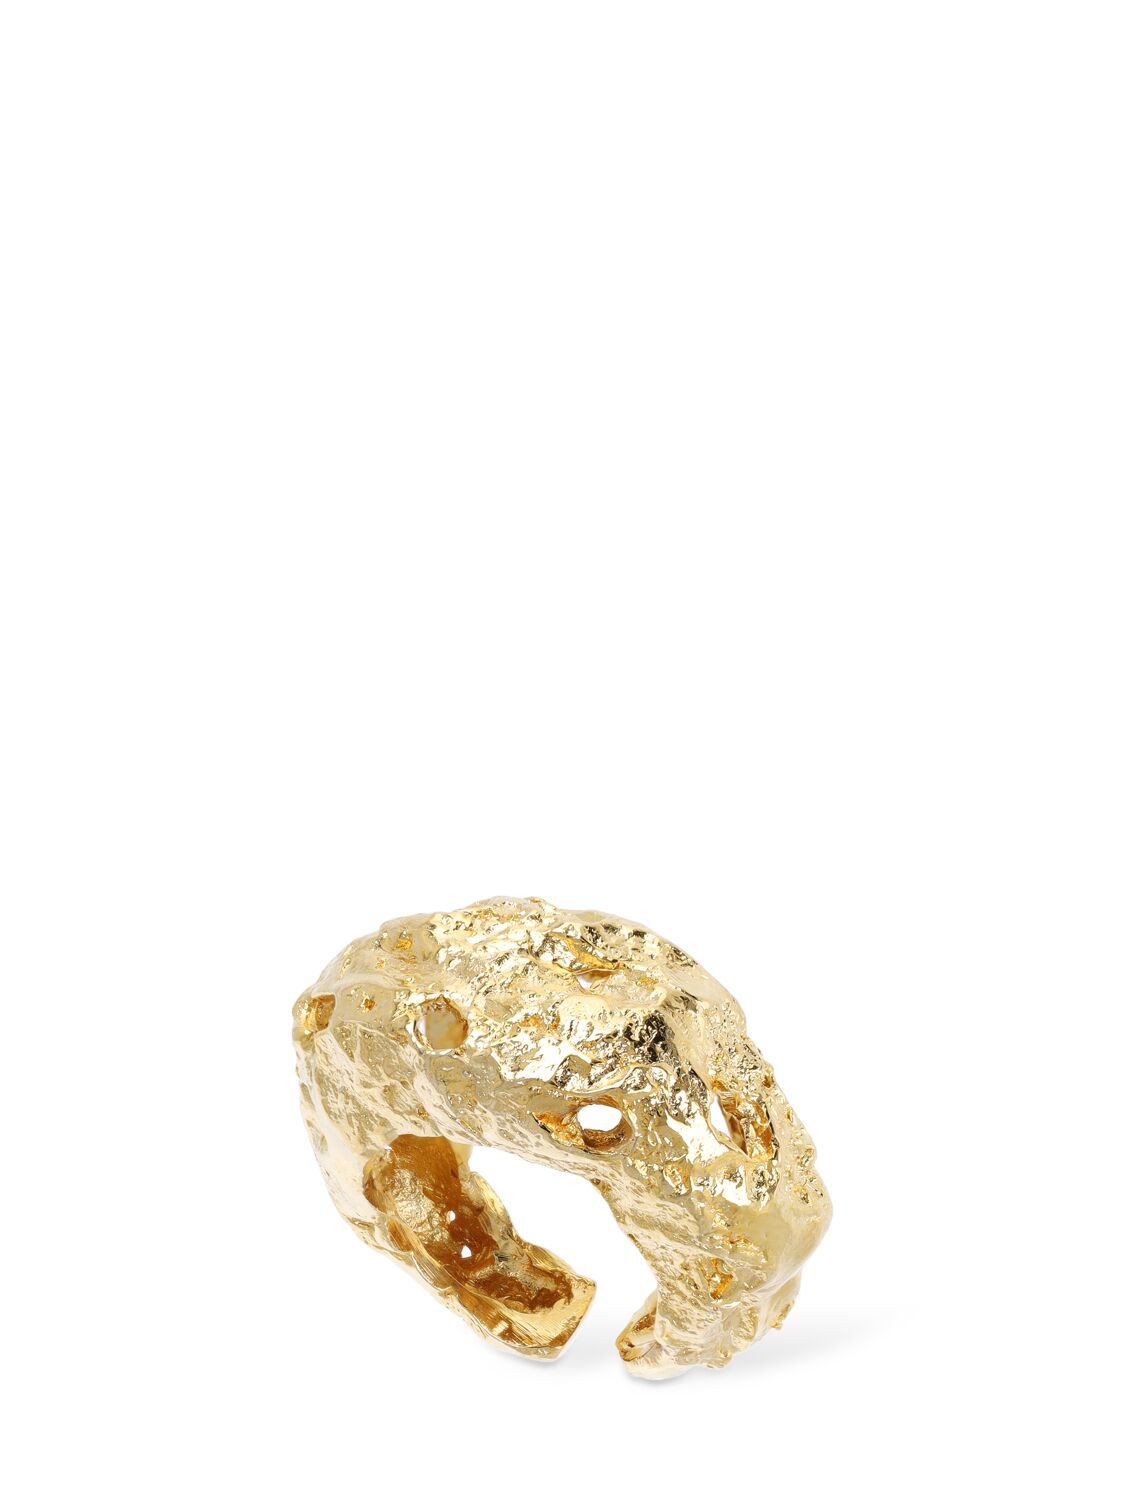 Paola Sighinolfi Galia Thick Ring In Gold